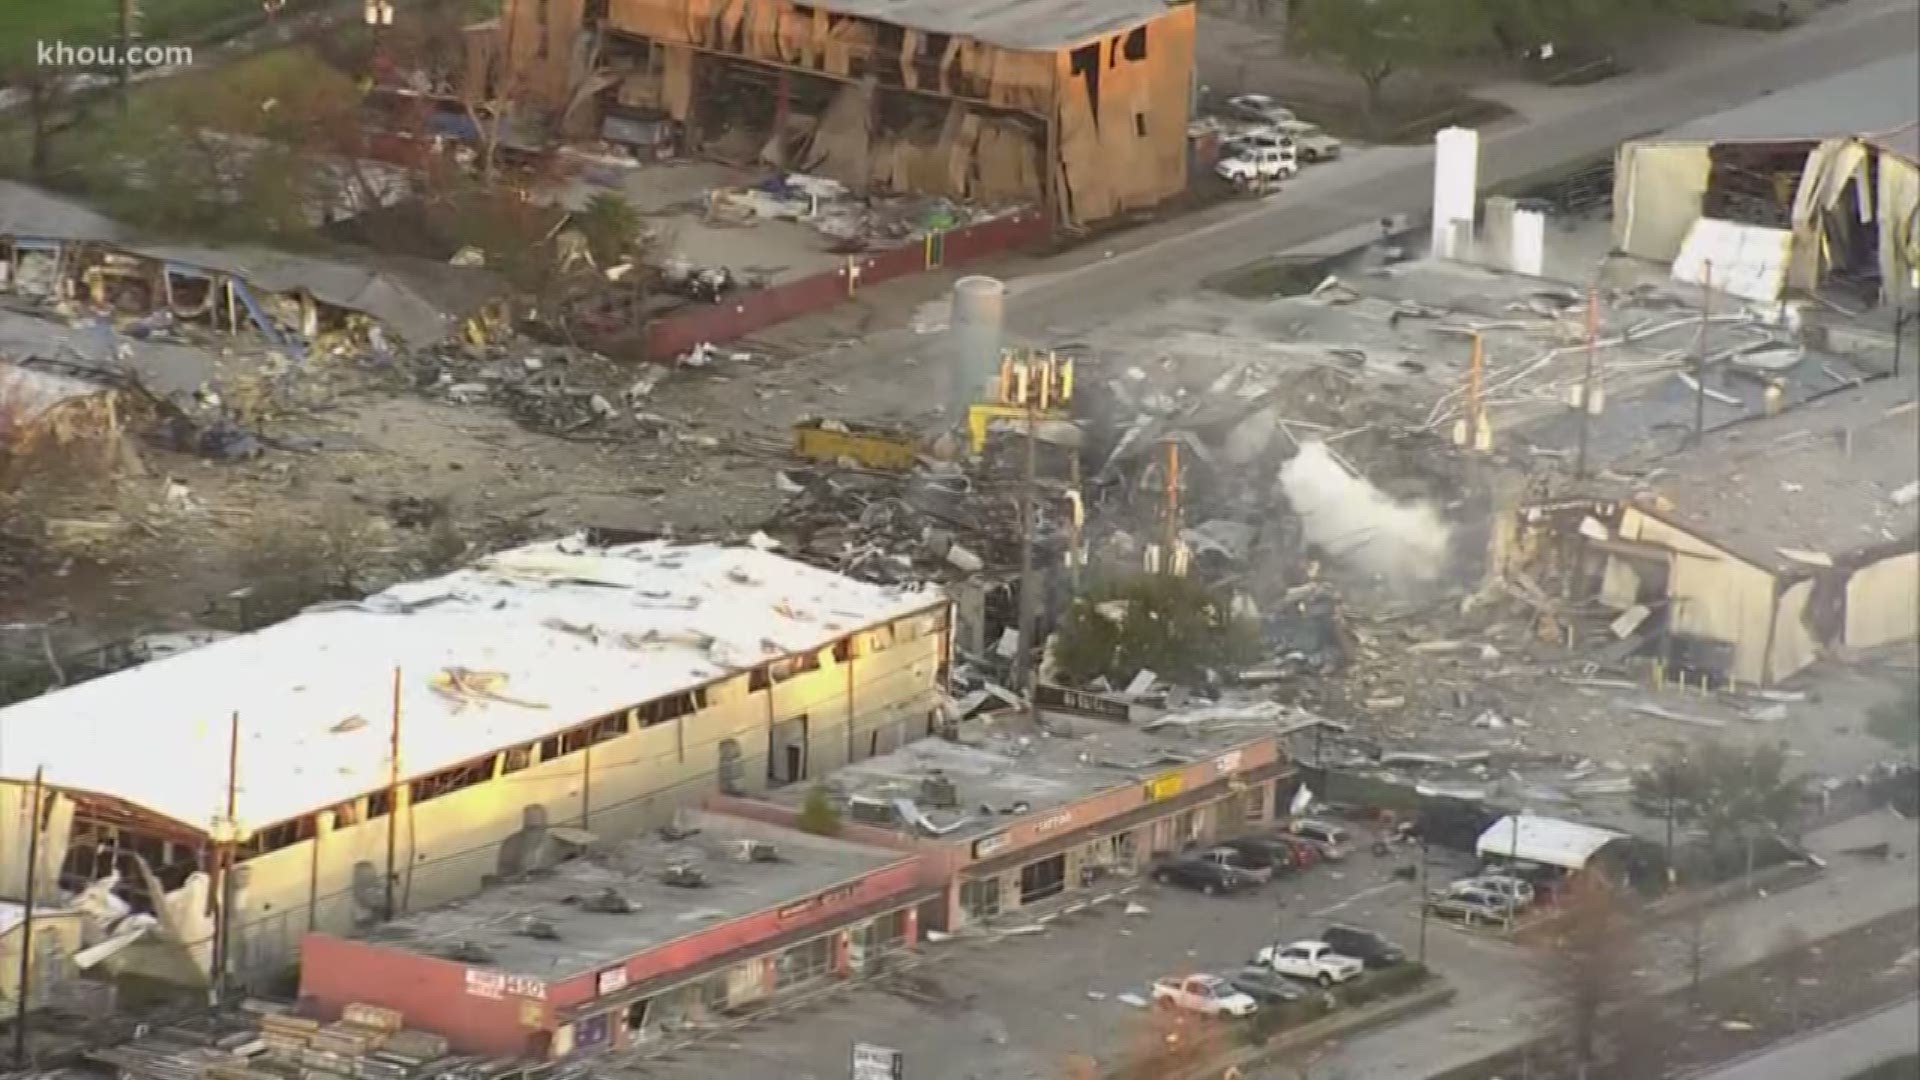 Two people were killed early Friday in a massive explosion at an industrial site in northwest Houston.